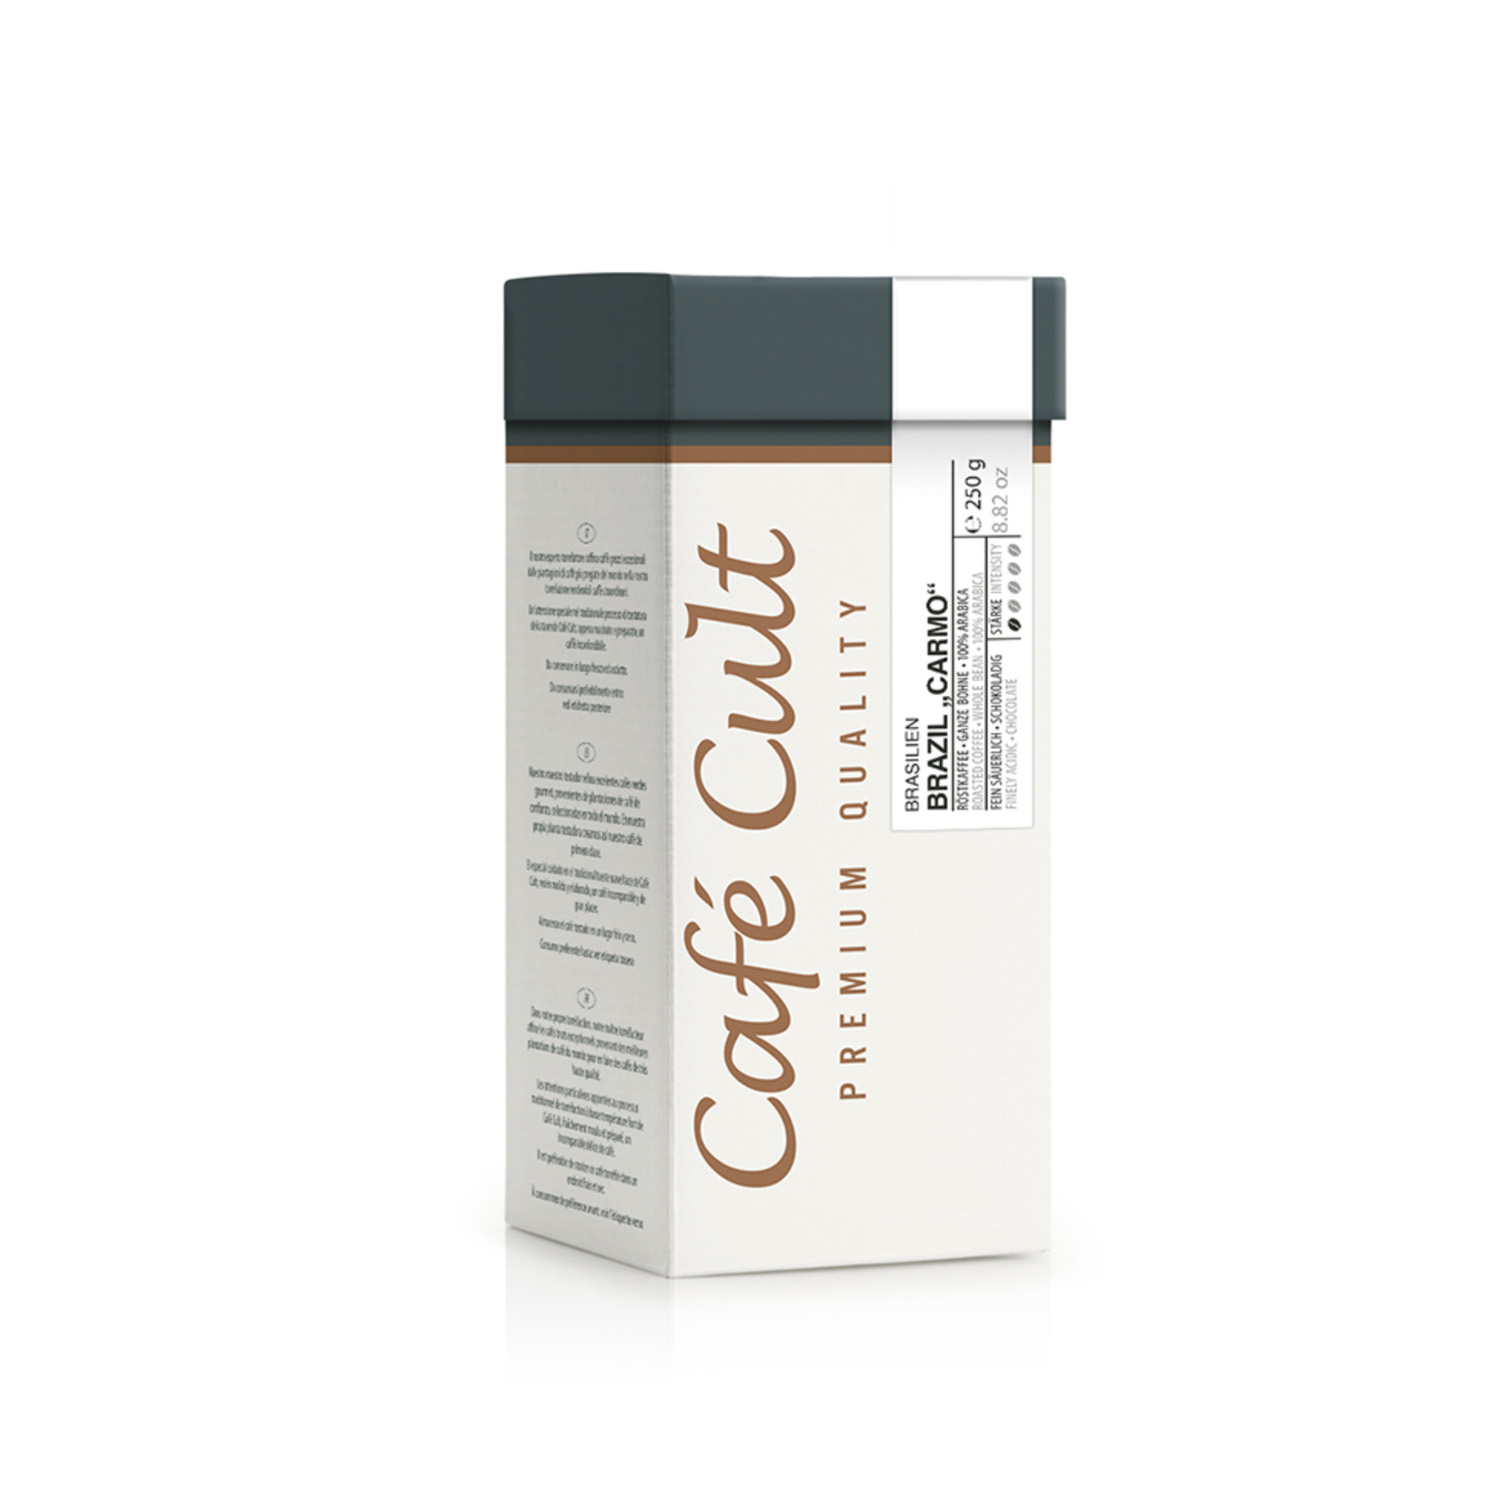 Cafe Cult "Cup of Excellence" Brazil Carmo 250g